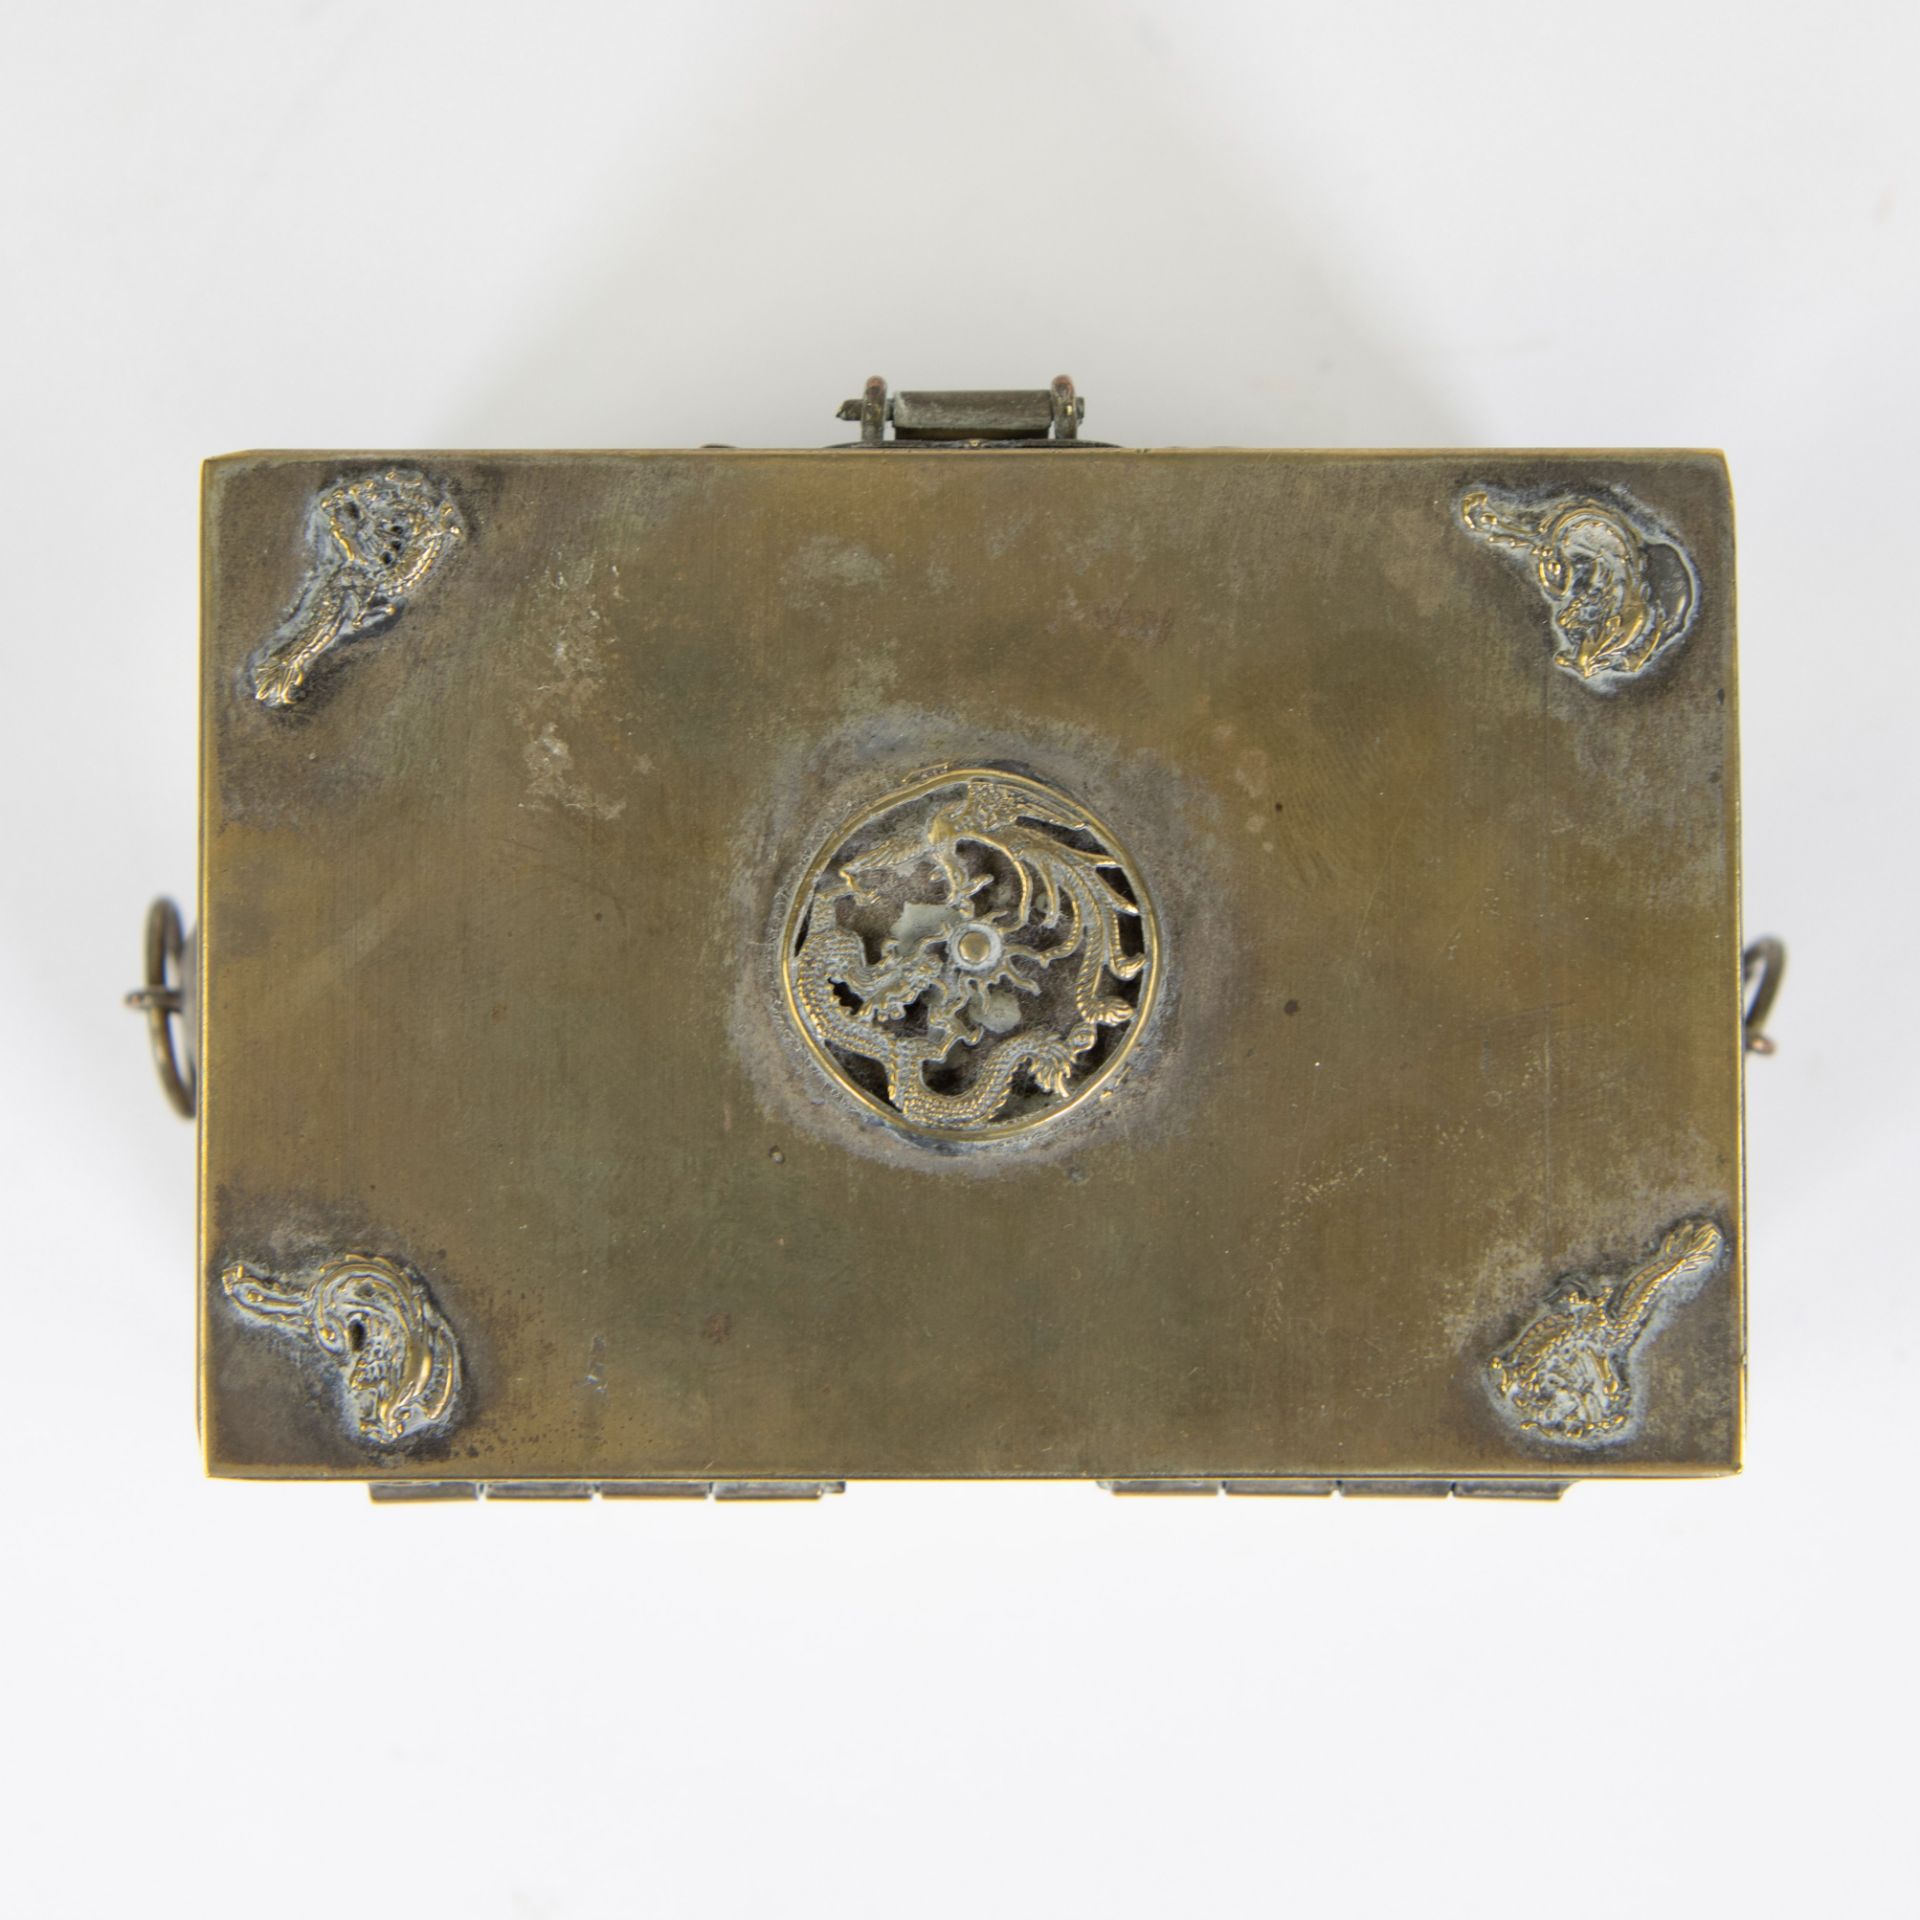 Chinese silver jewelry box - Image 5 of 6